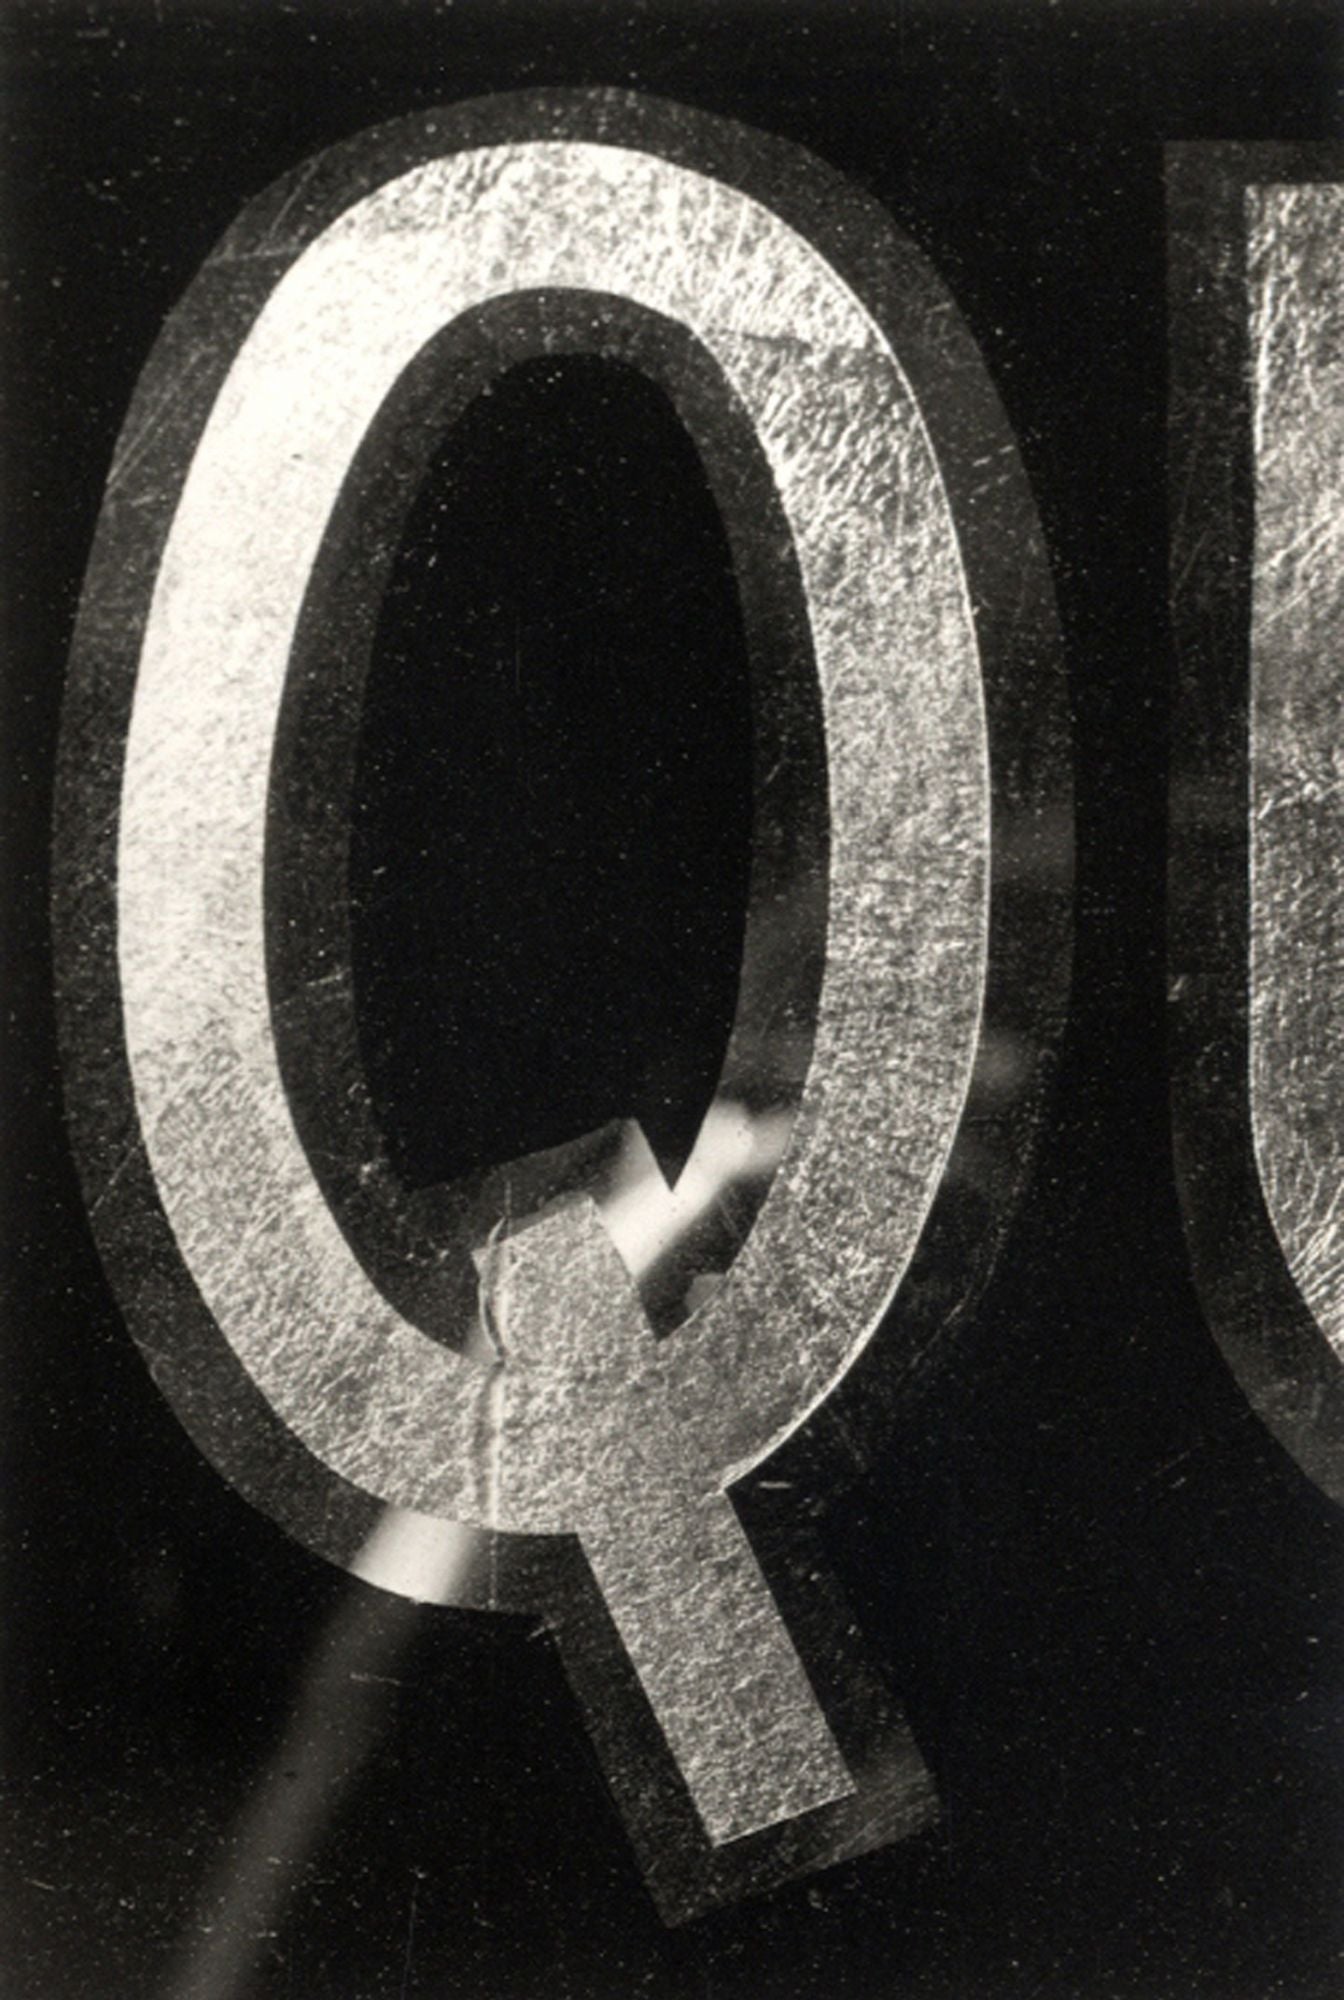 Lee Friedlander: Letters from the People (Special Limited Edition with One Vintage Gelatin Silver Print: "Q")